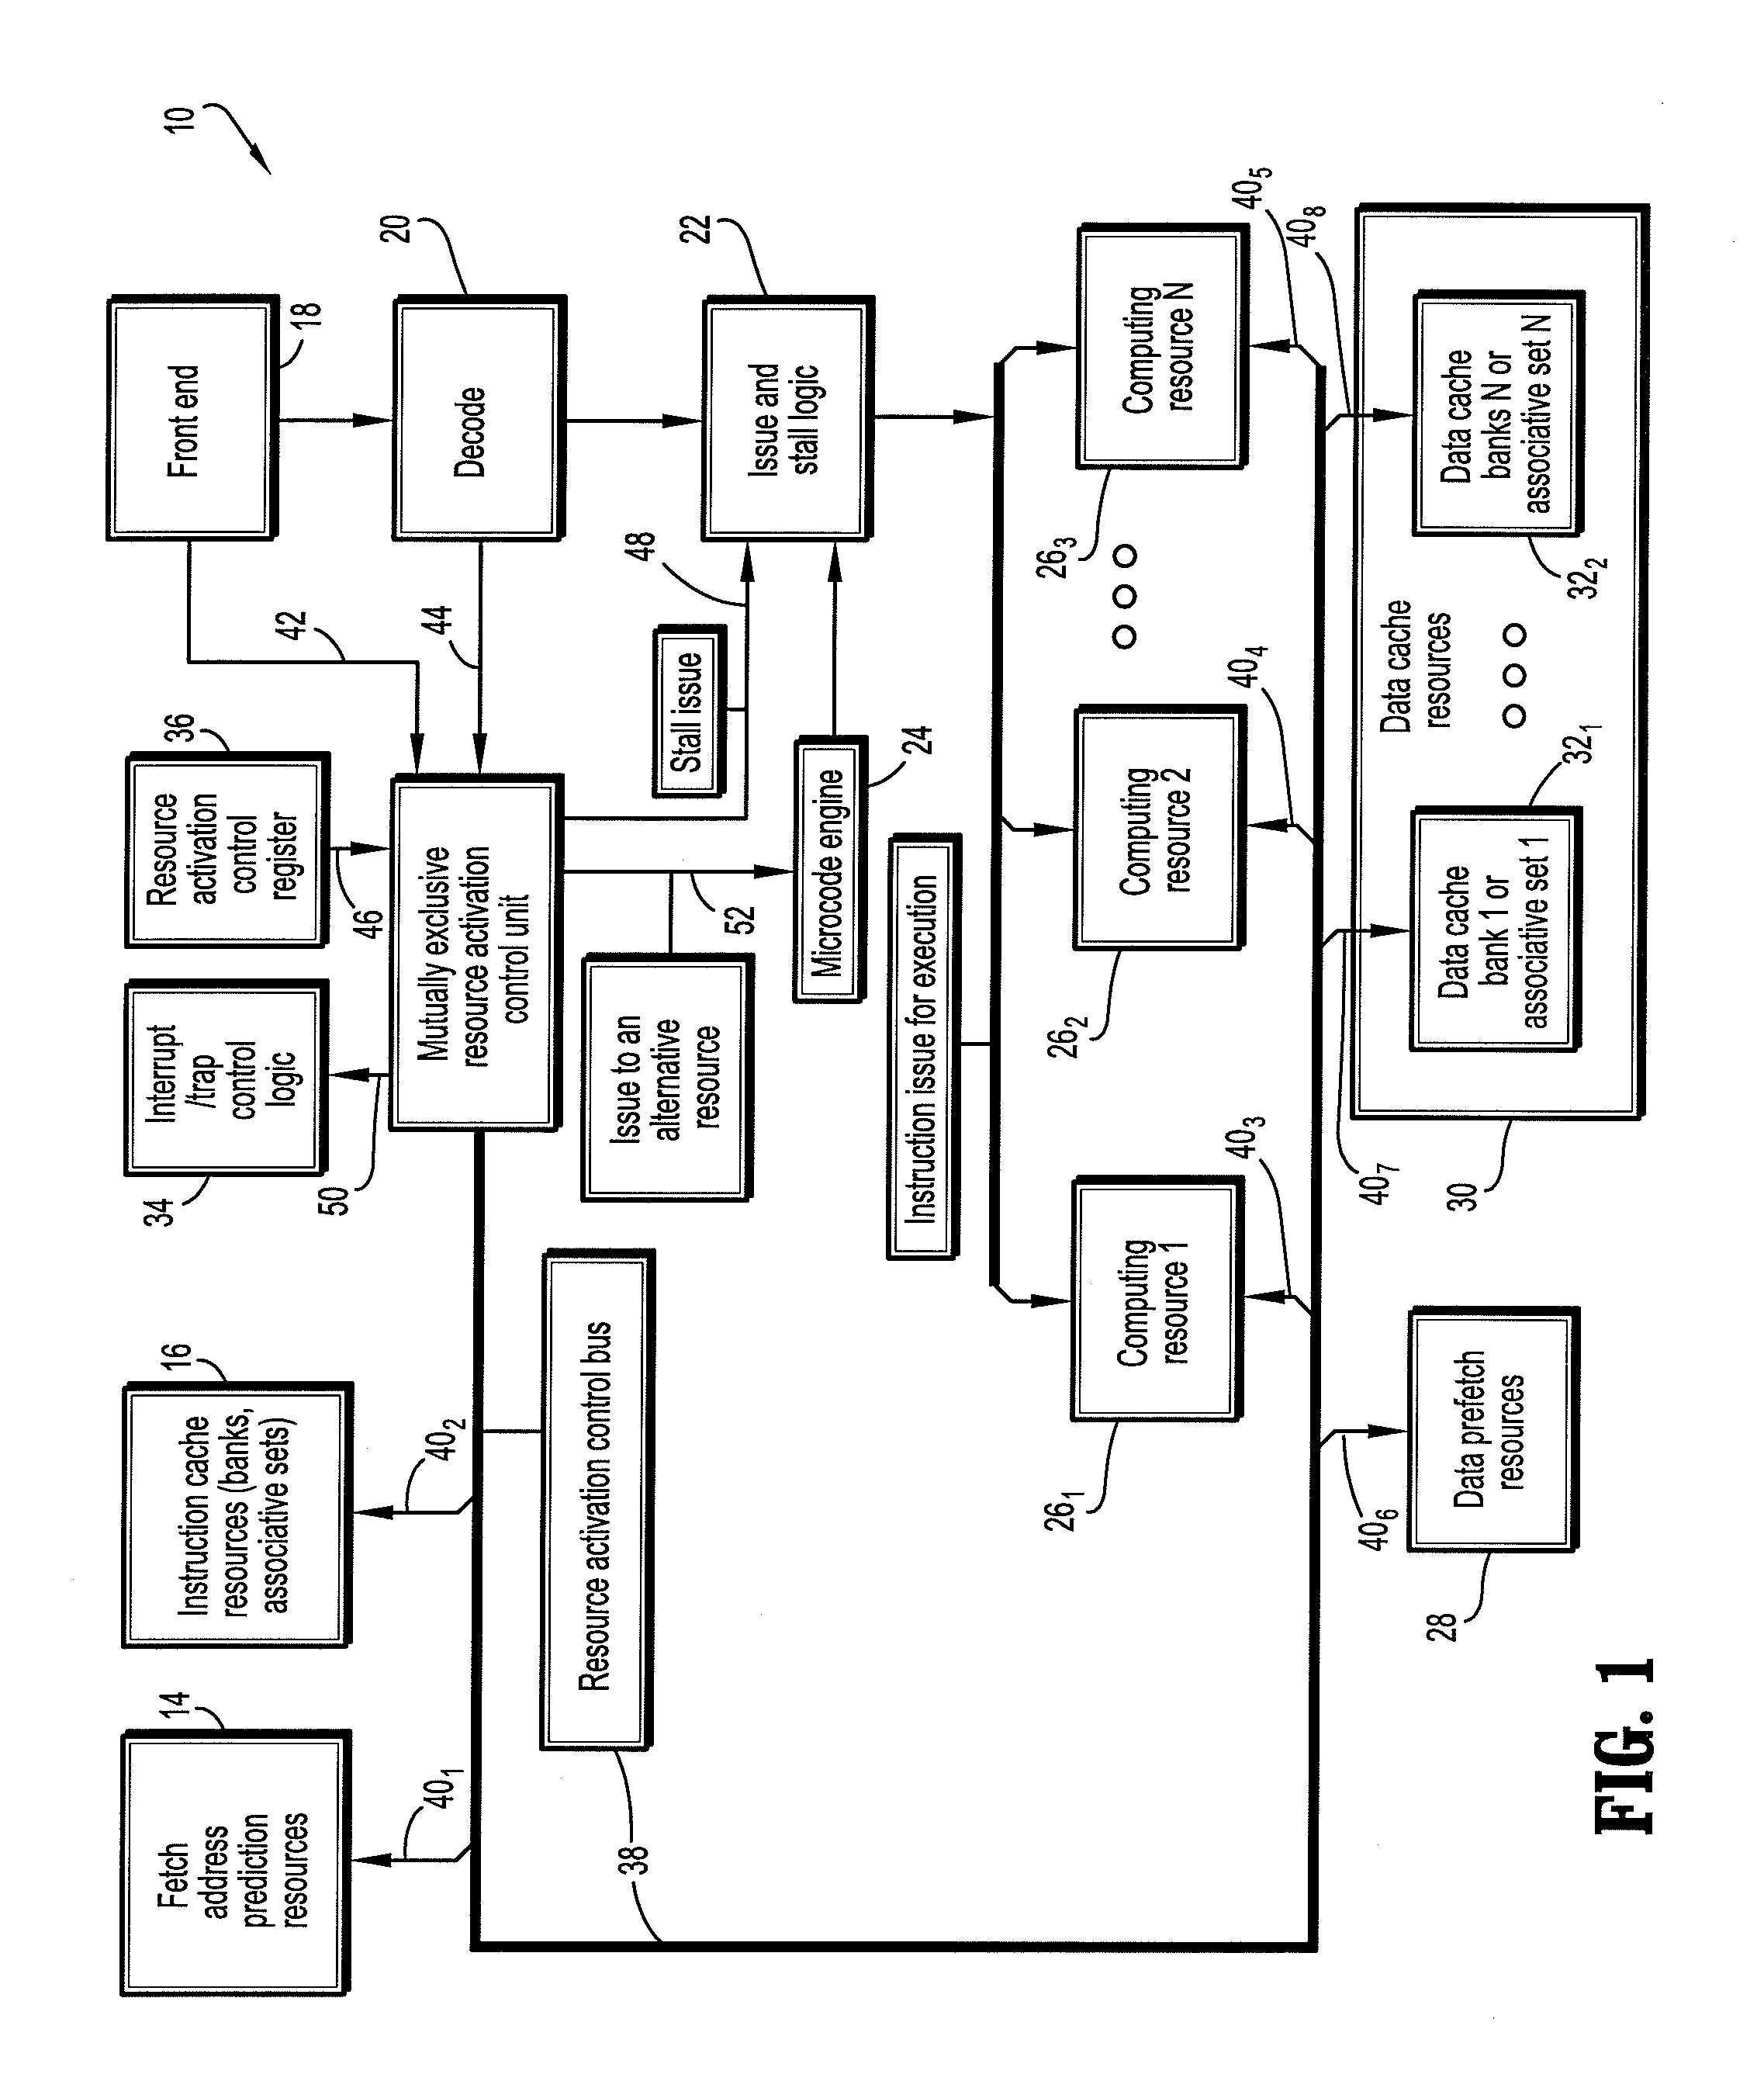 Systems and methods for mutually exclusive activation of microprocessor resources to control maximum power